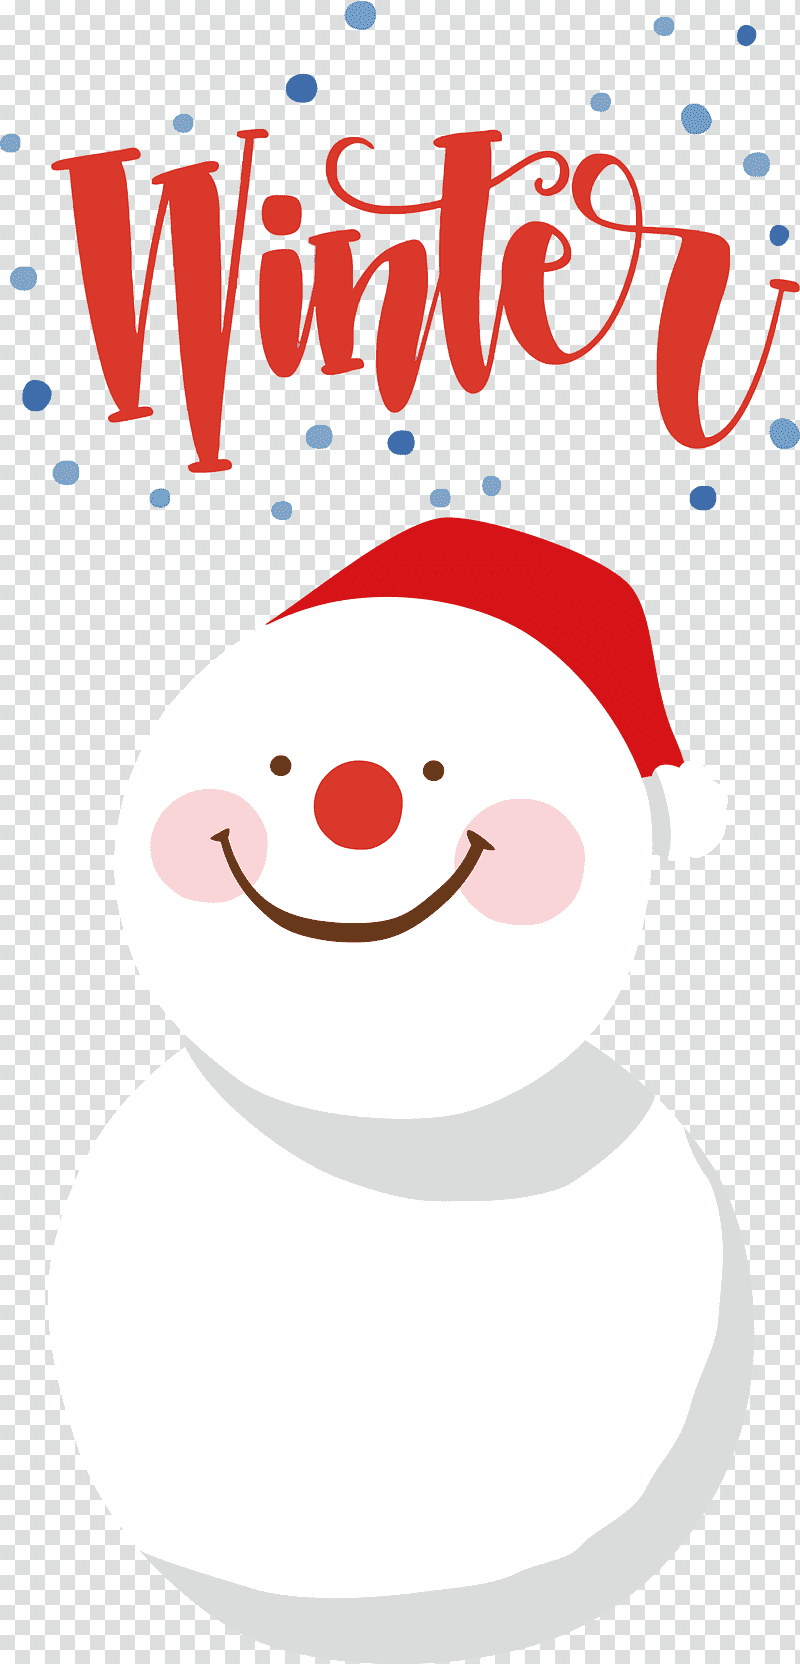 Winter Hello Winter Welcome Winter, Winter
, Plotter, Christmas Day, Santa Clausm, Cartoon M, Text transparent background PNG clipart